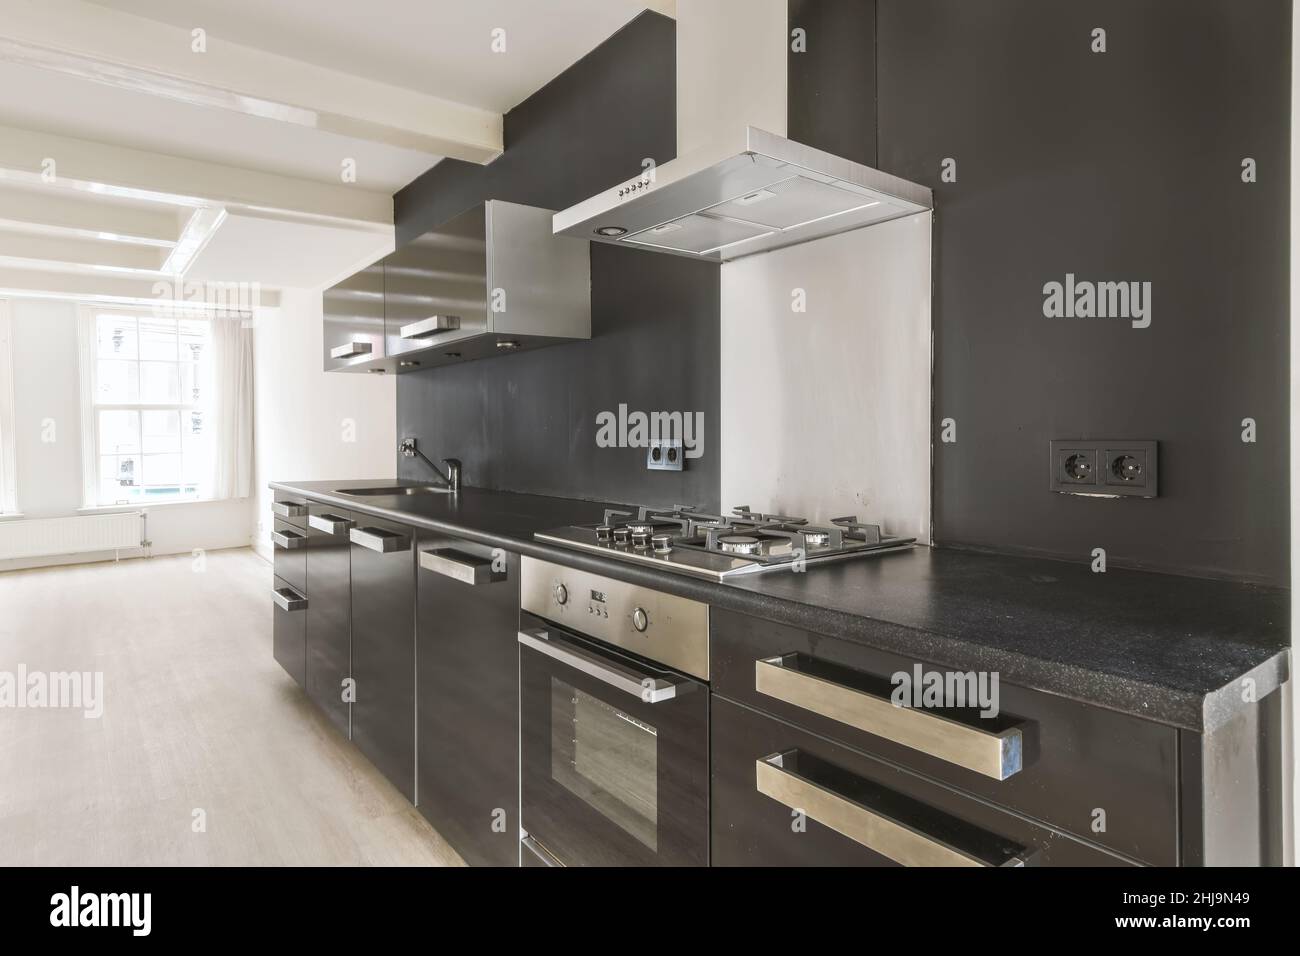 https://c8.alamy.com/comp/2HJ9N49/interior-of-a-bright-empty-room-with-modern-kitchen-appliances-with-black-cabinets-2HJ9N49.jpg